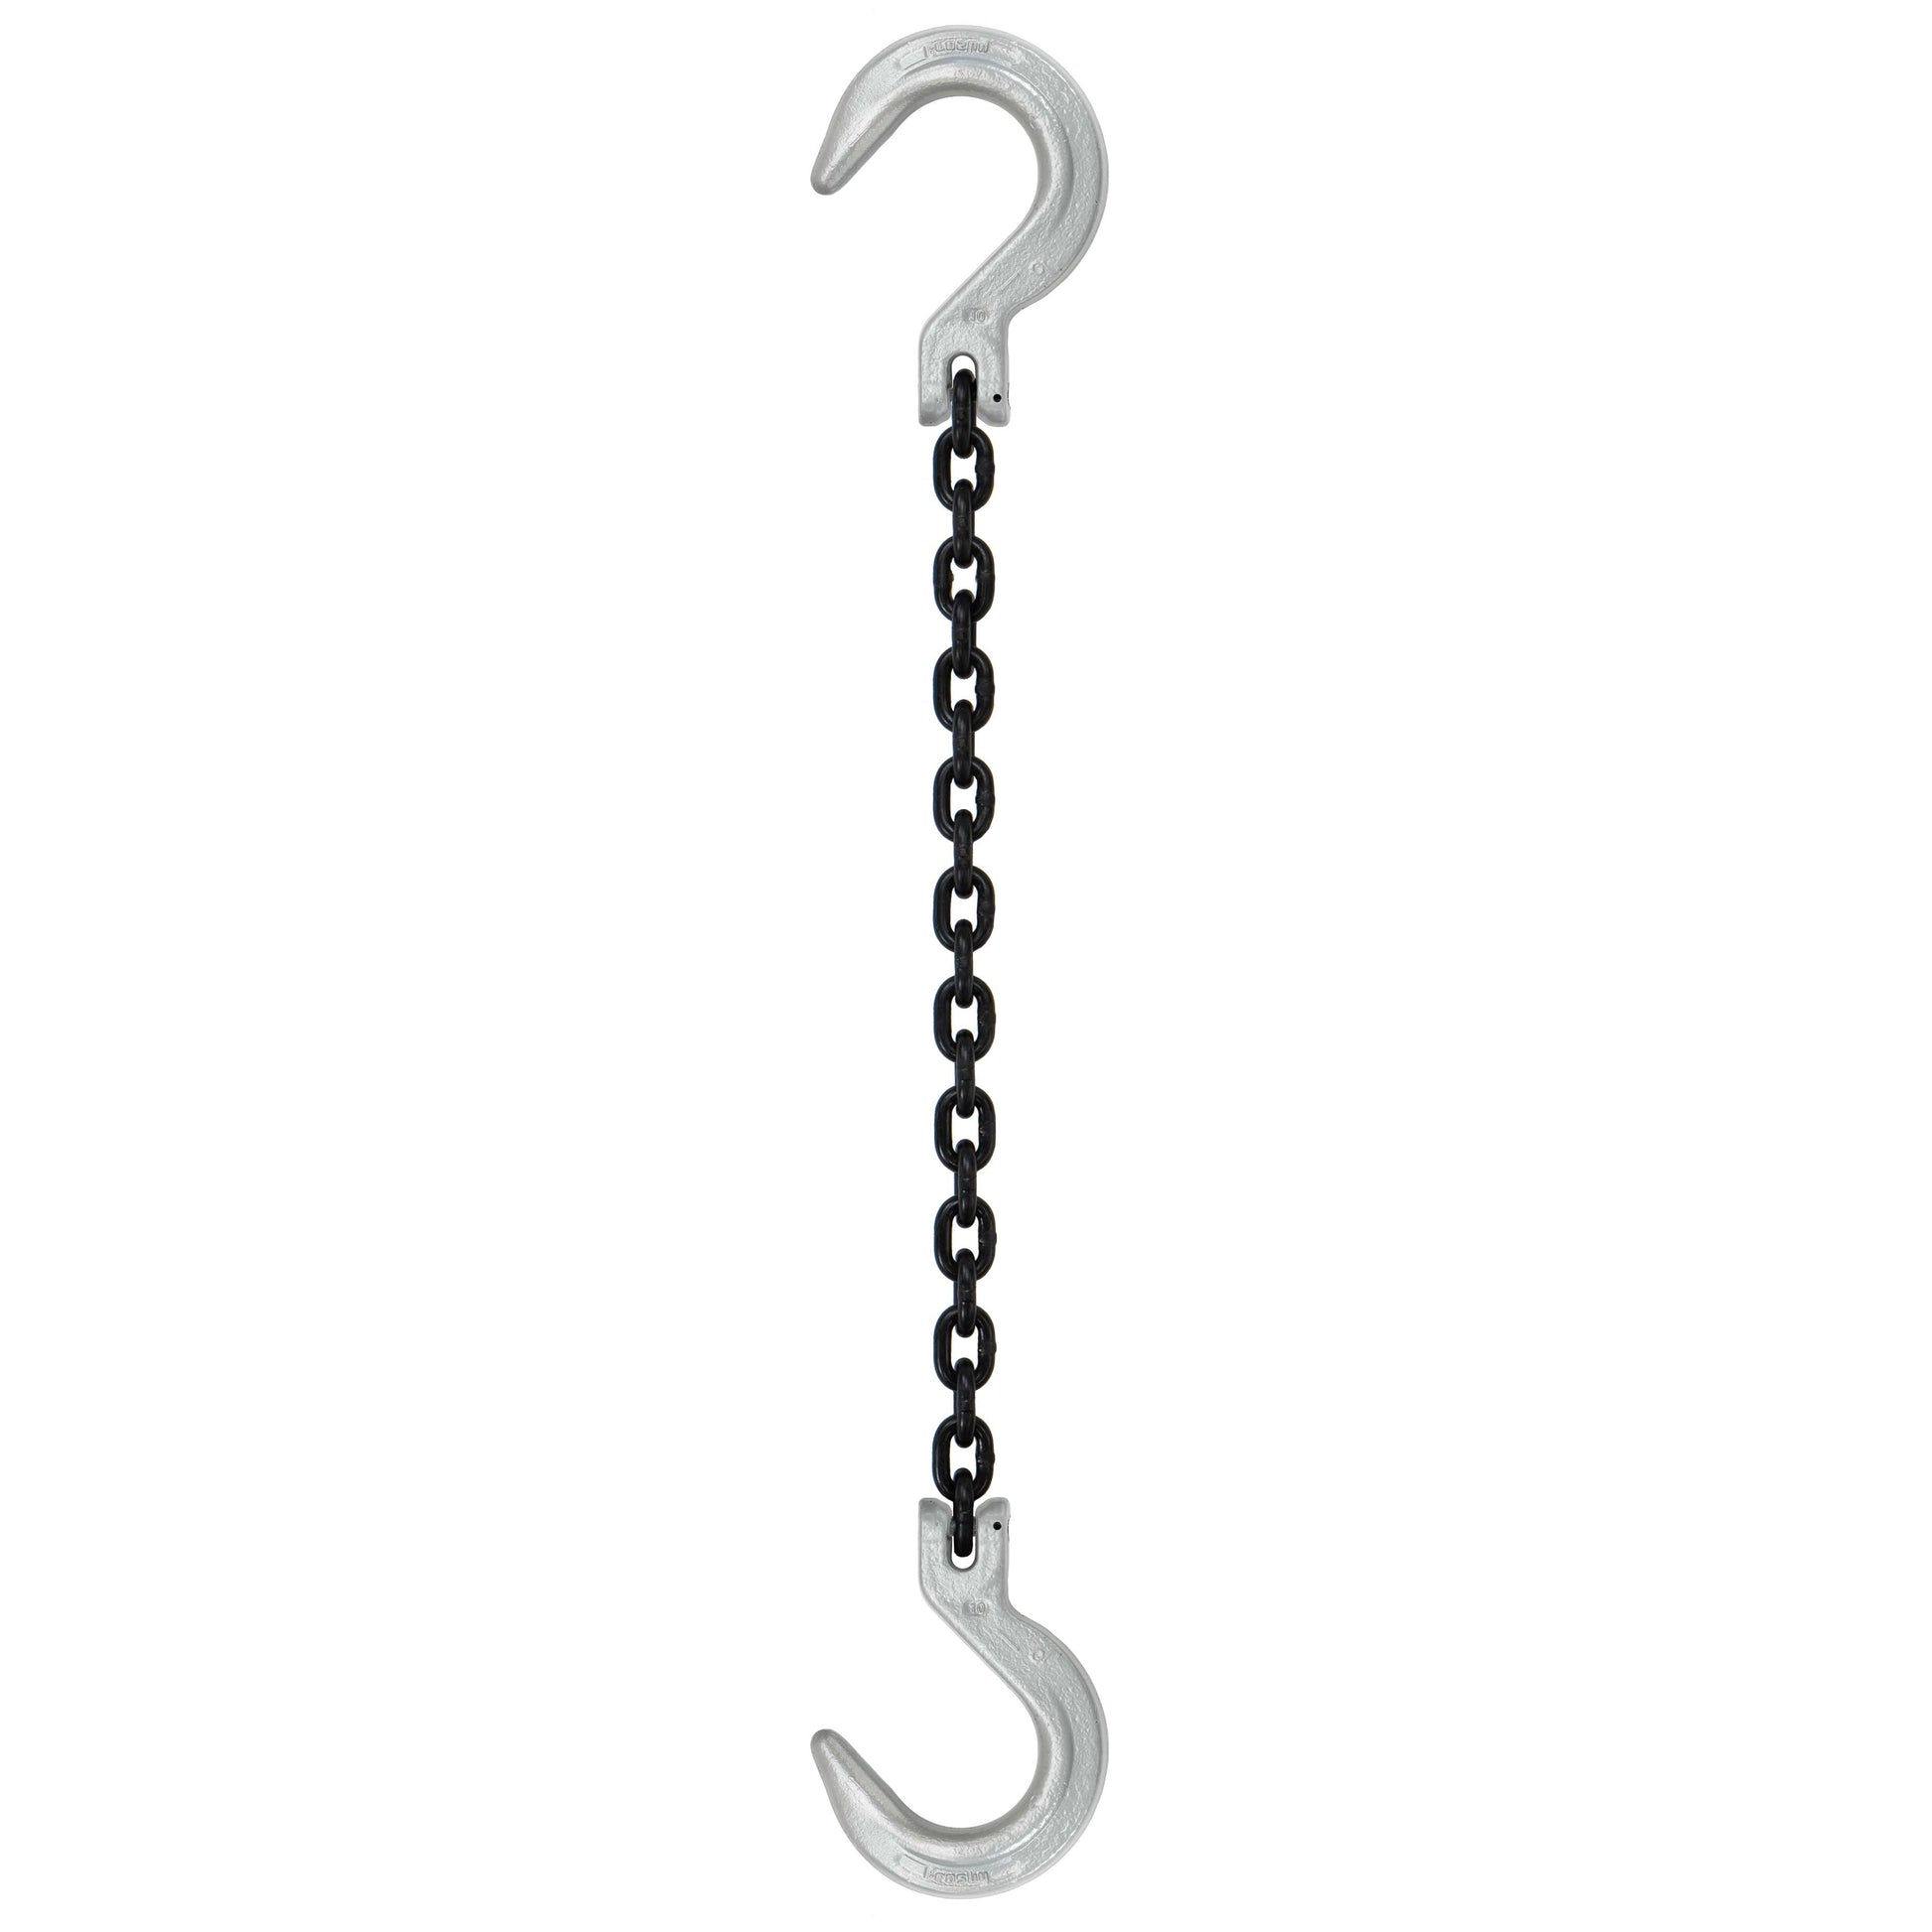 516 inch x 14 foot Domestic Single Leg Chain Sling w Crosby Foundry & Foundry Hooks Grade 100 image 1 of 2